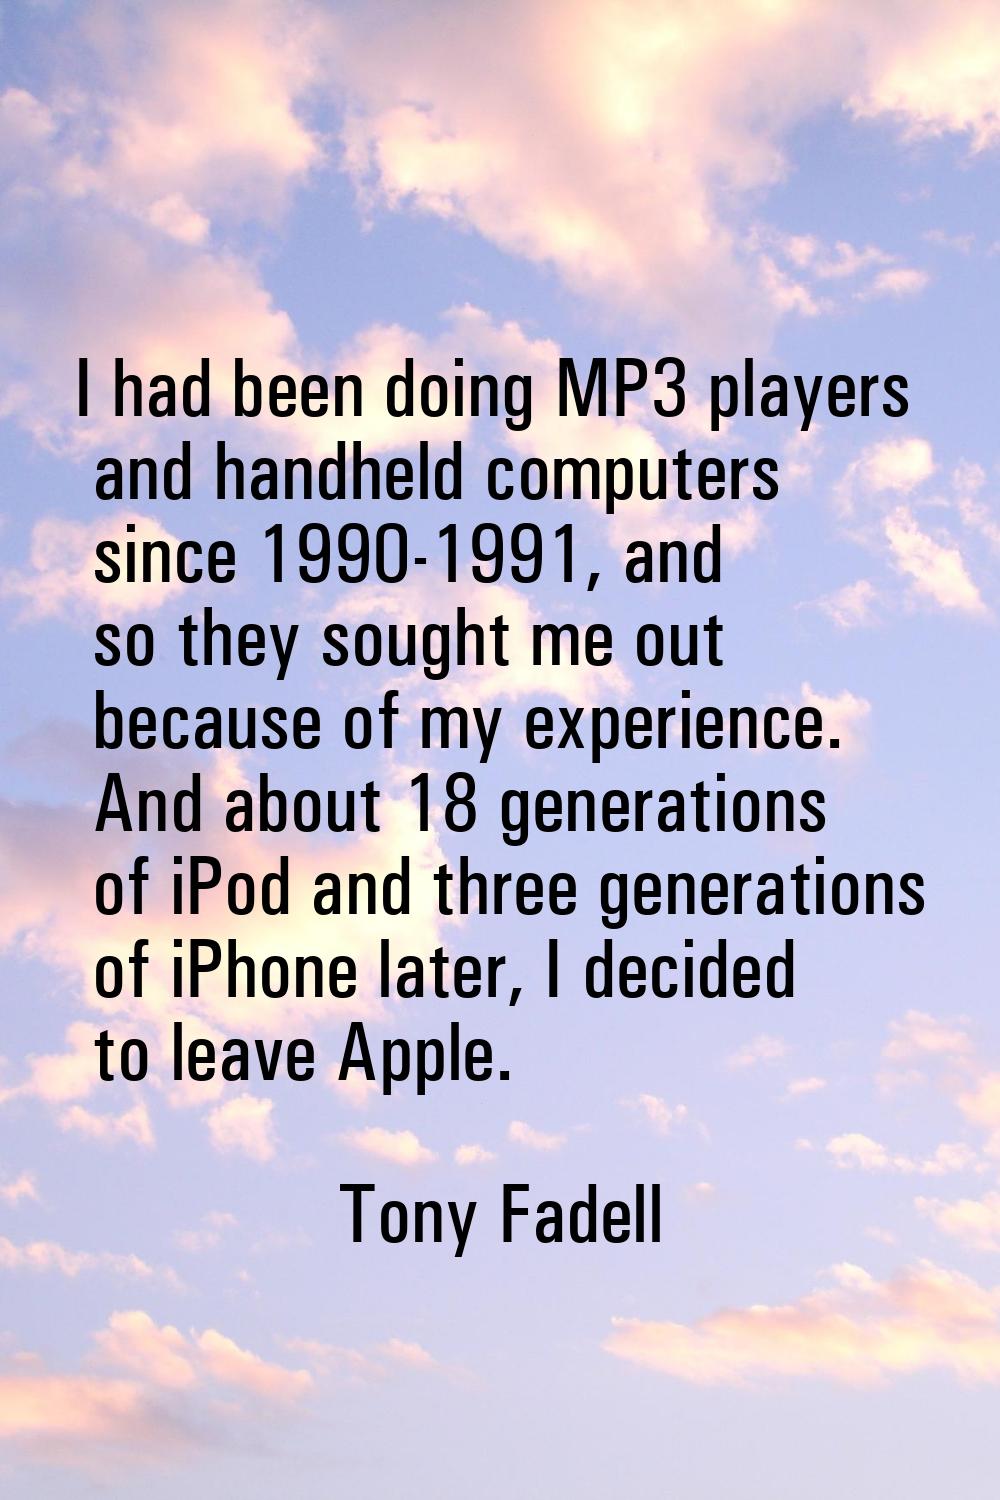 I had been doing MP3 players and handheld computers since 1990-1991, and so they sought me out beca